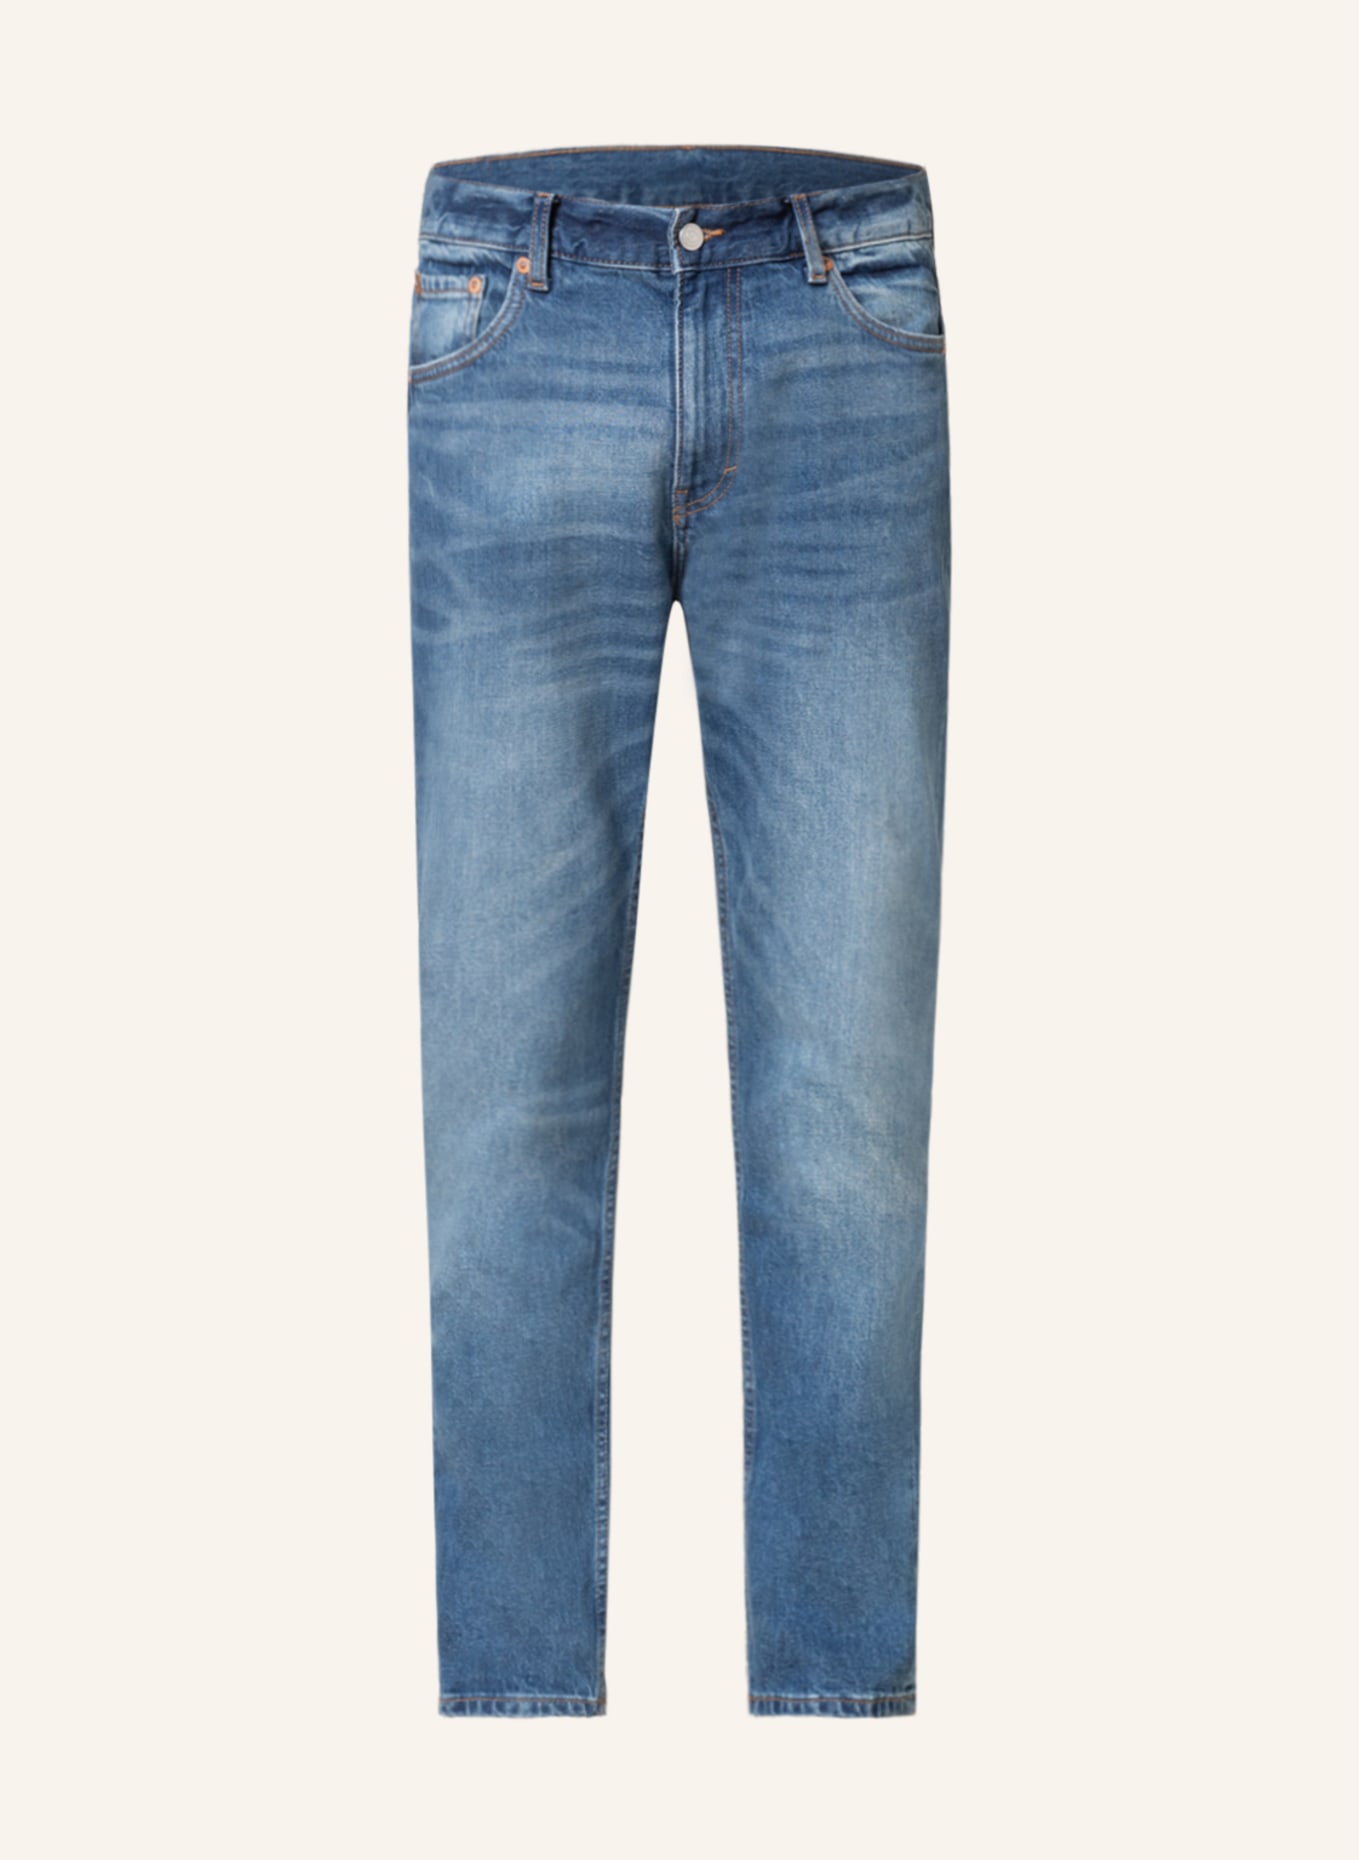 WEEKDAY Jeans EASY Regular Straight Fit, Farbe: 75-101 Wave blue (Bild 1)